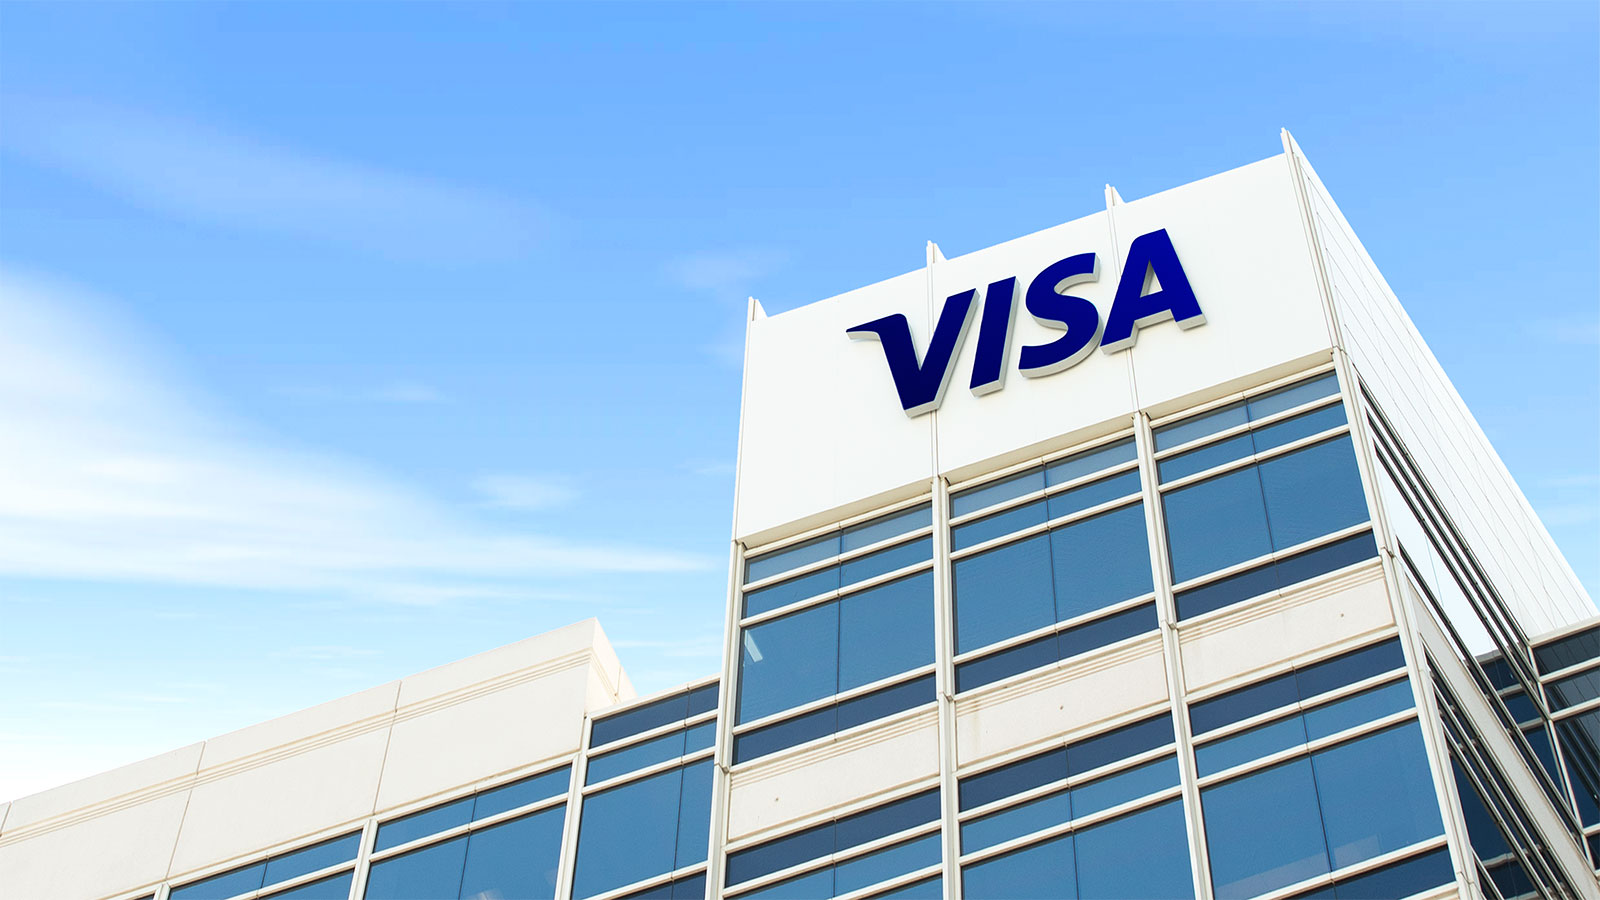 Visa will buy fintech service working with crypto projects for $ 5.3 billion